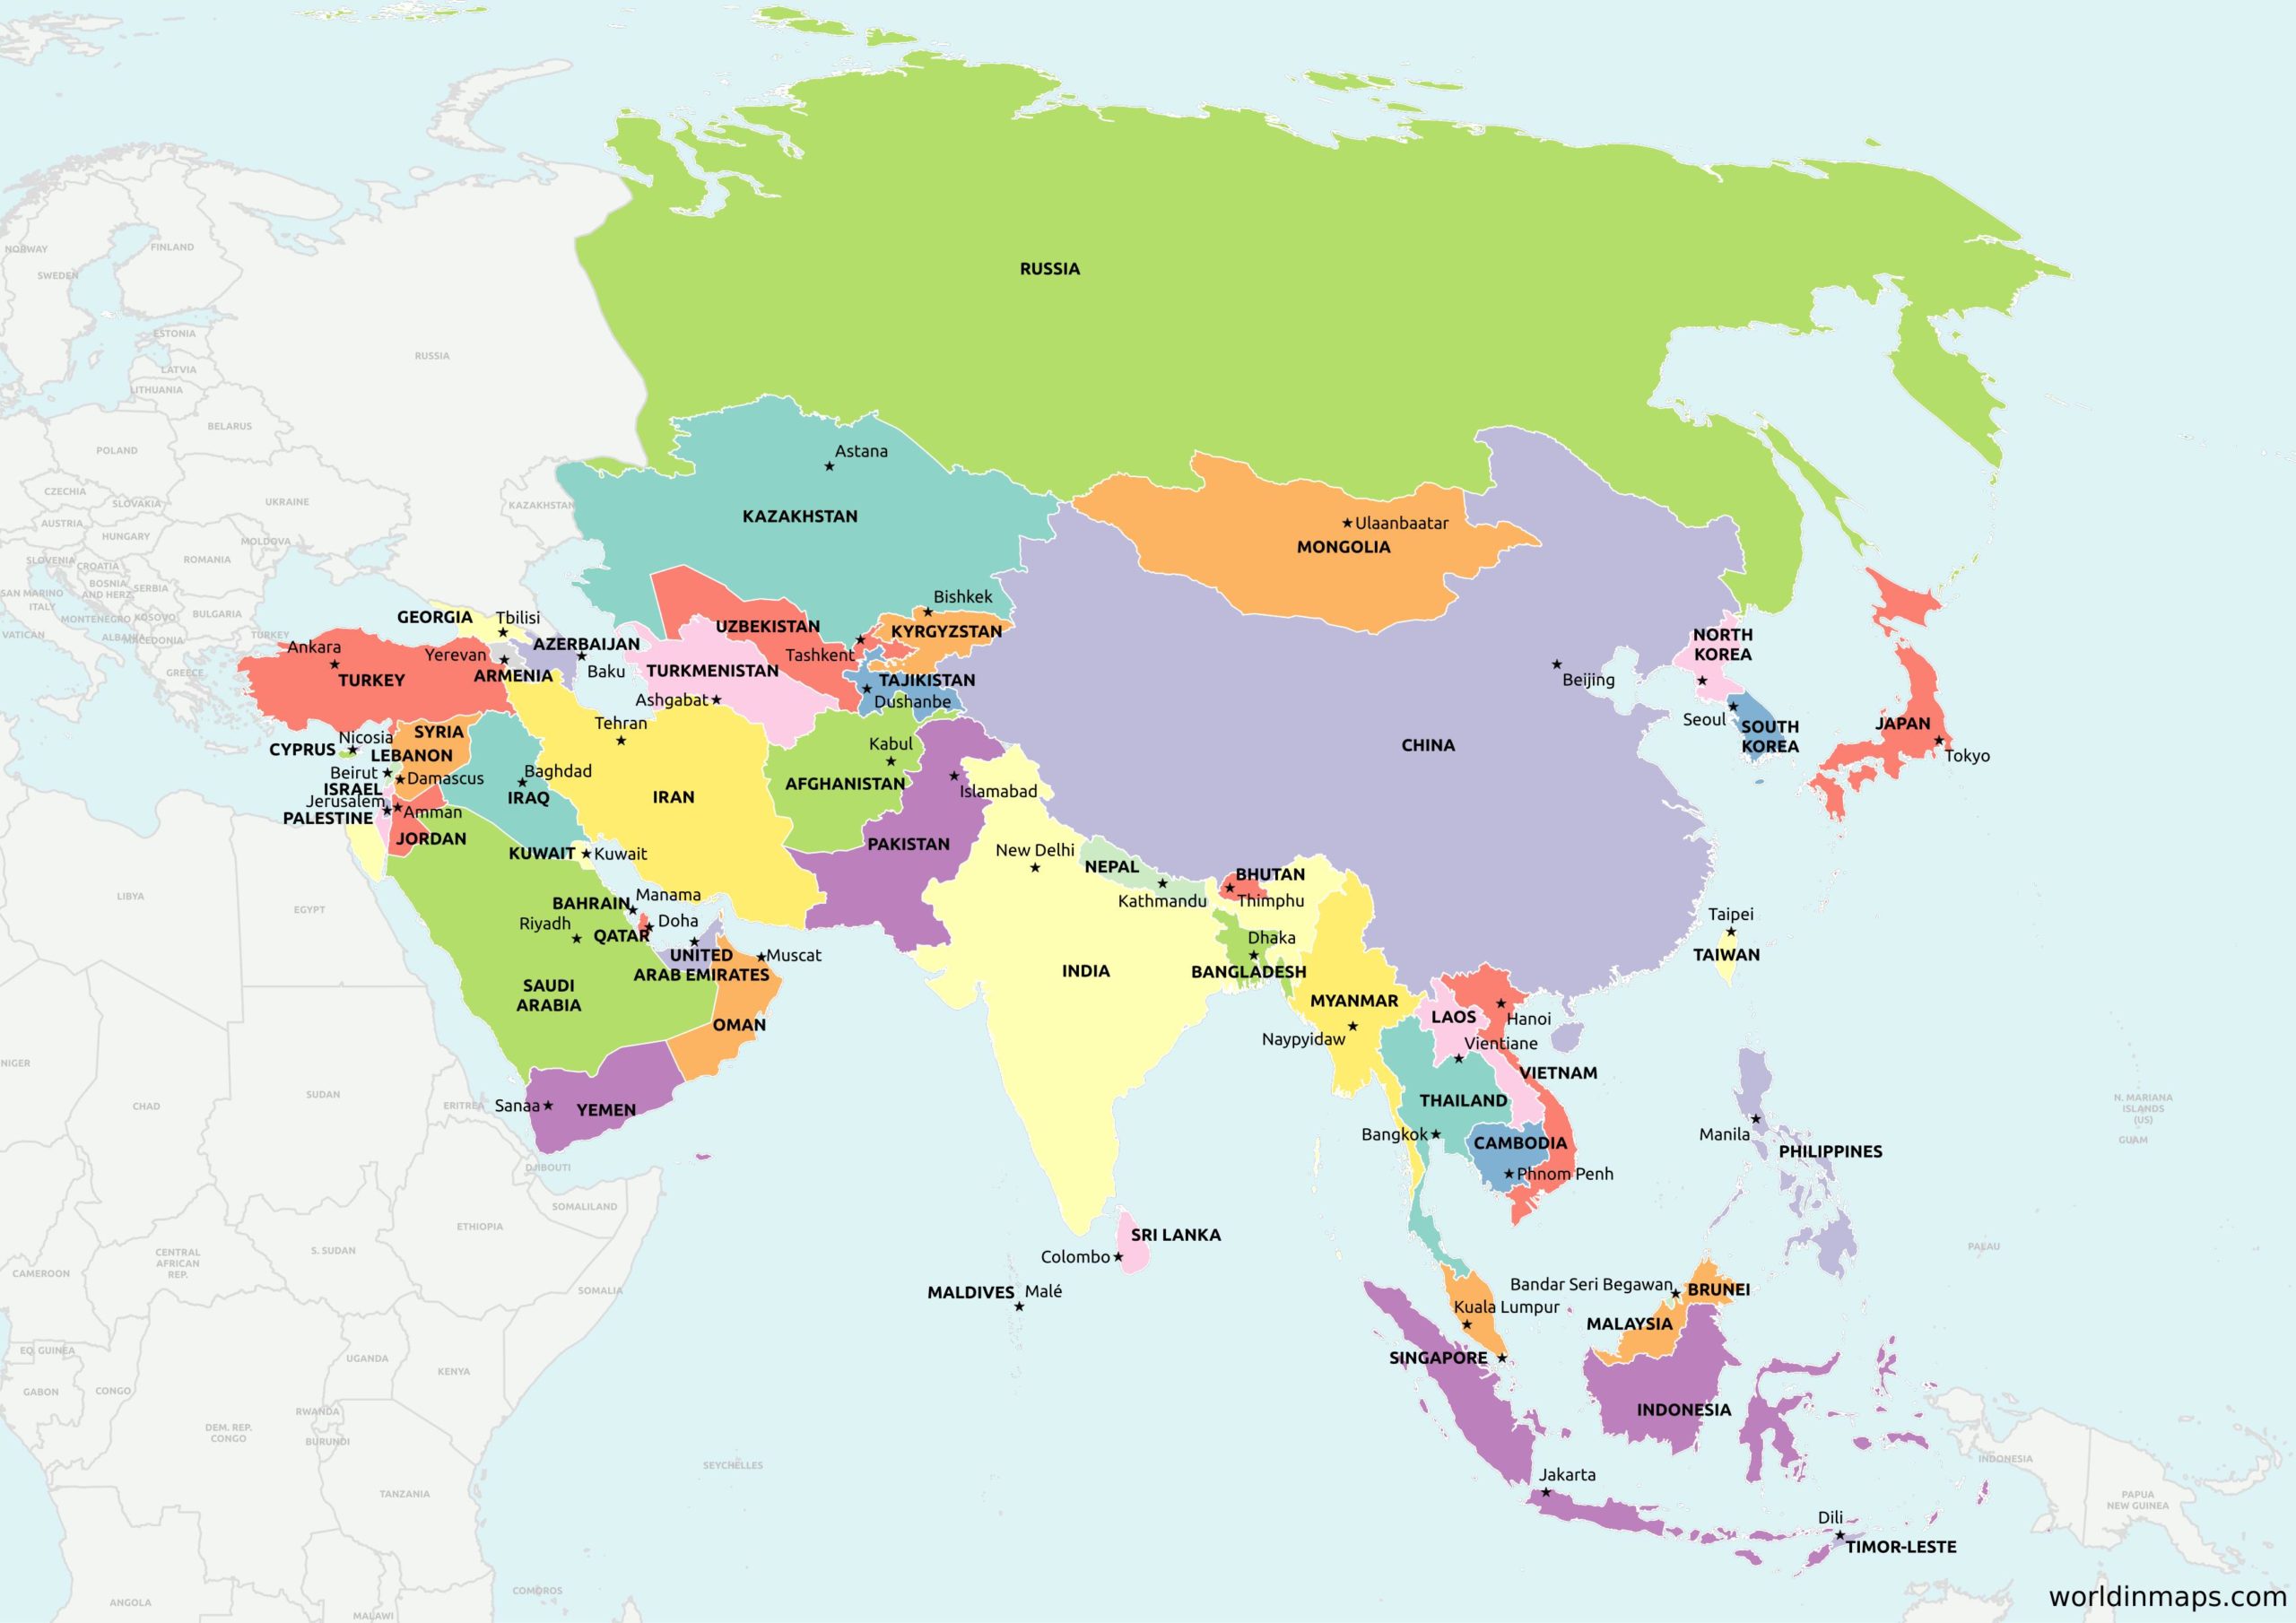 Asia World in maps